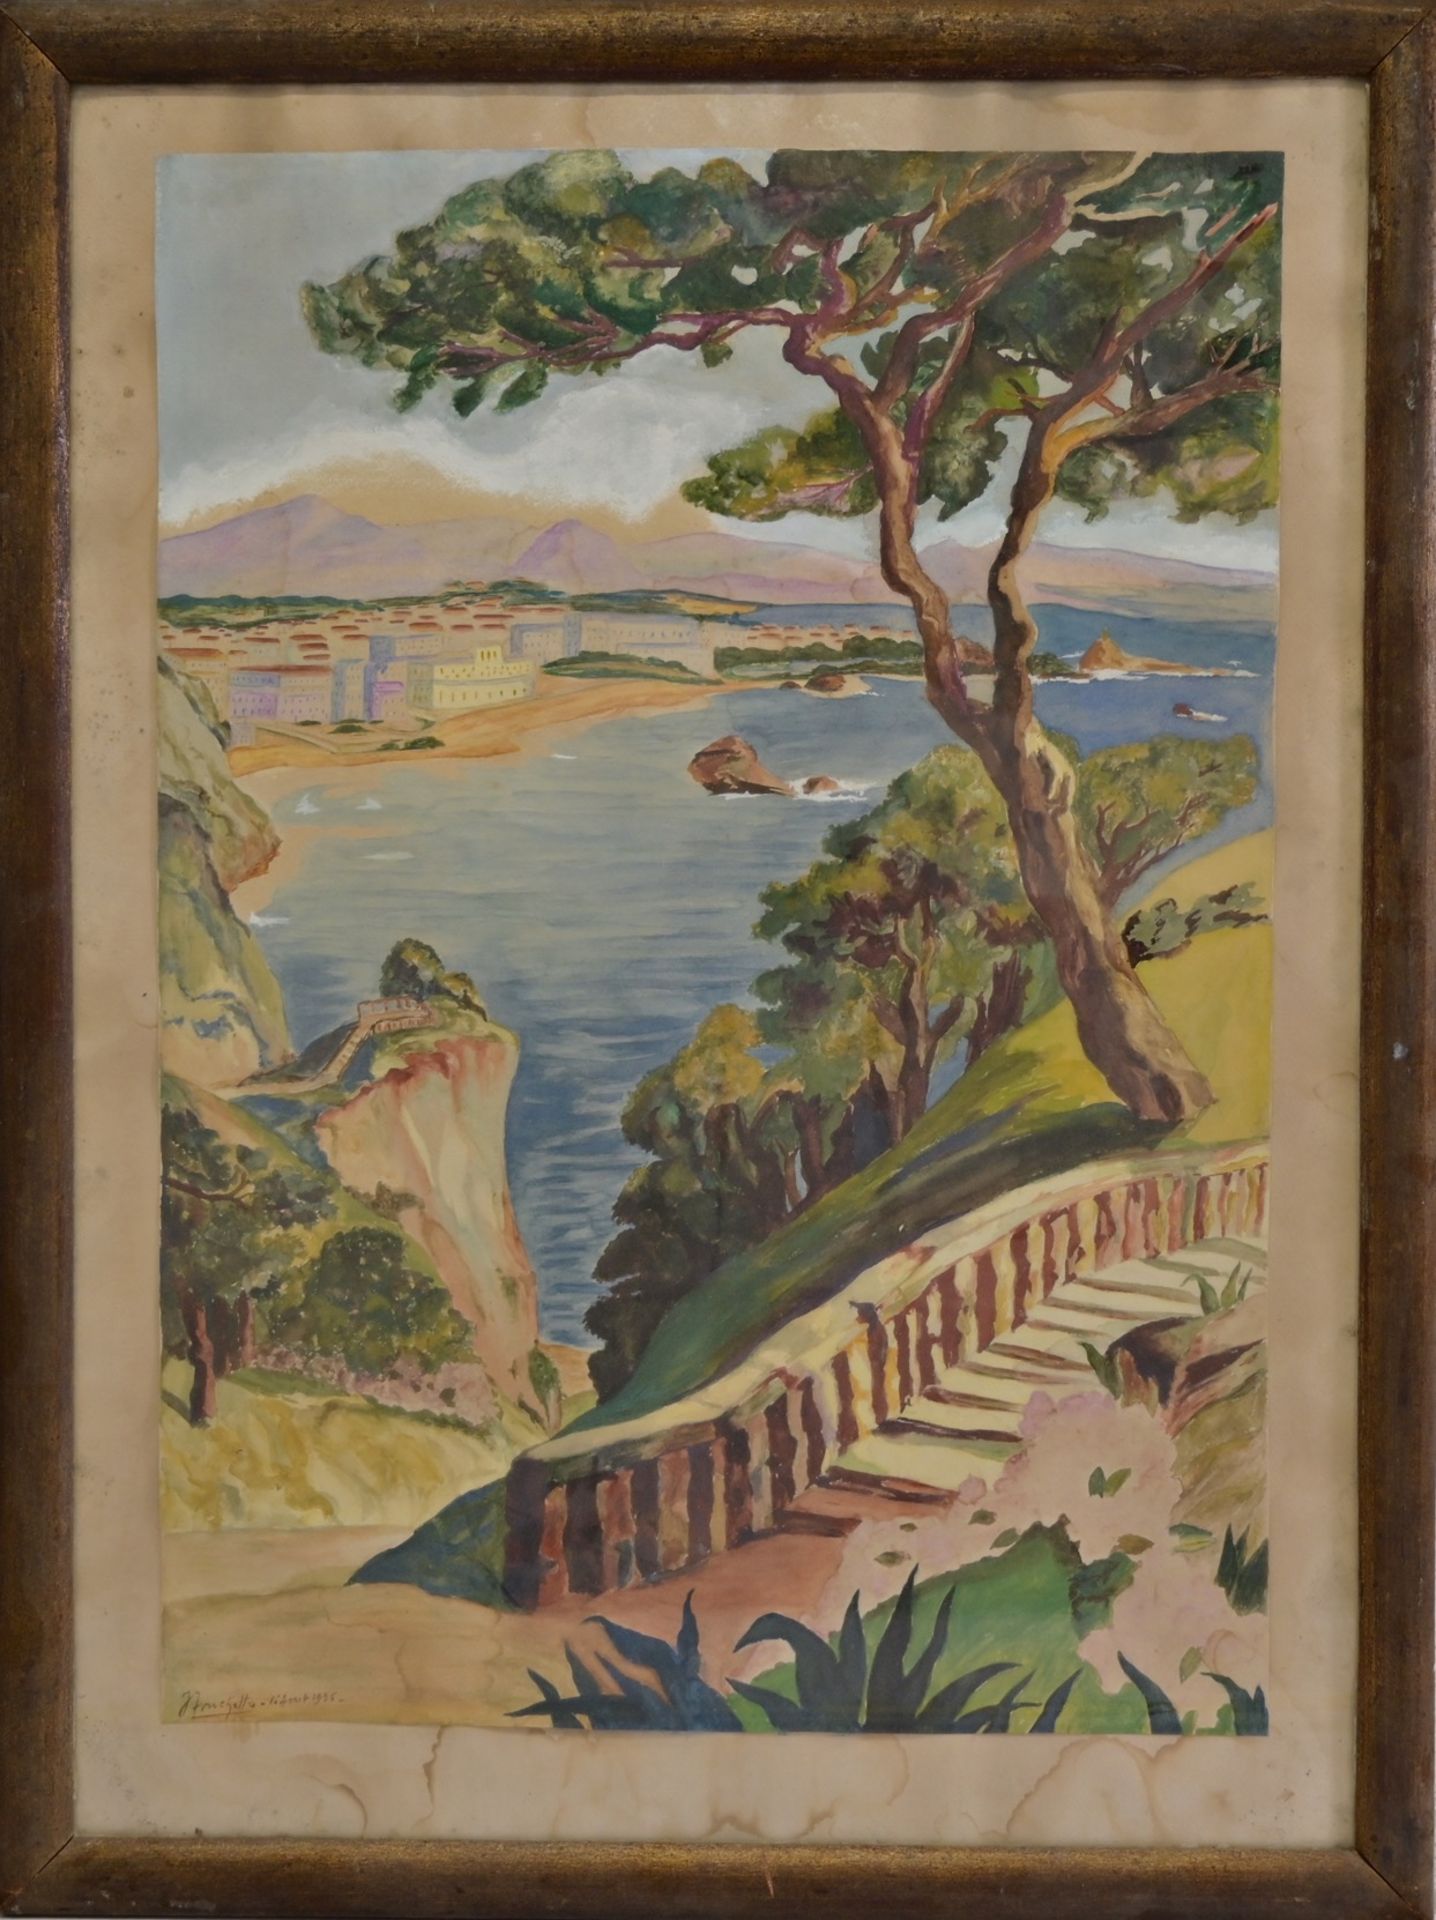 "French Riviera" 1936, watercolor on paper, signed by J Fruchetto, French Painting of the 20th C. - Image 2 of 5